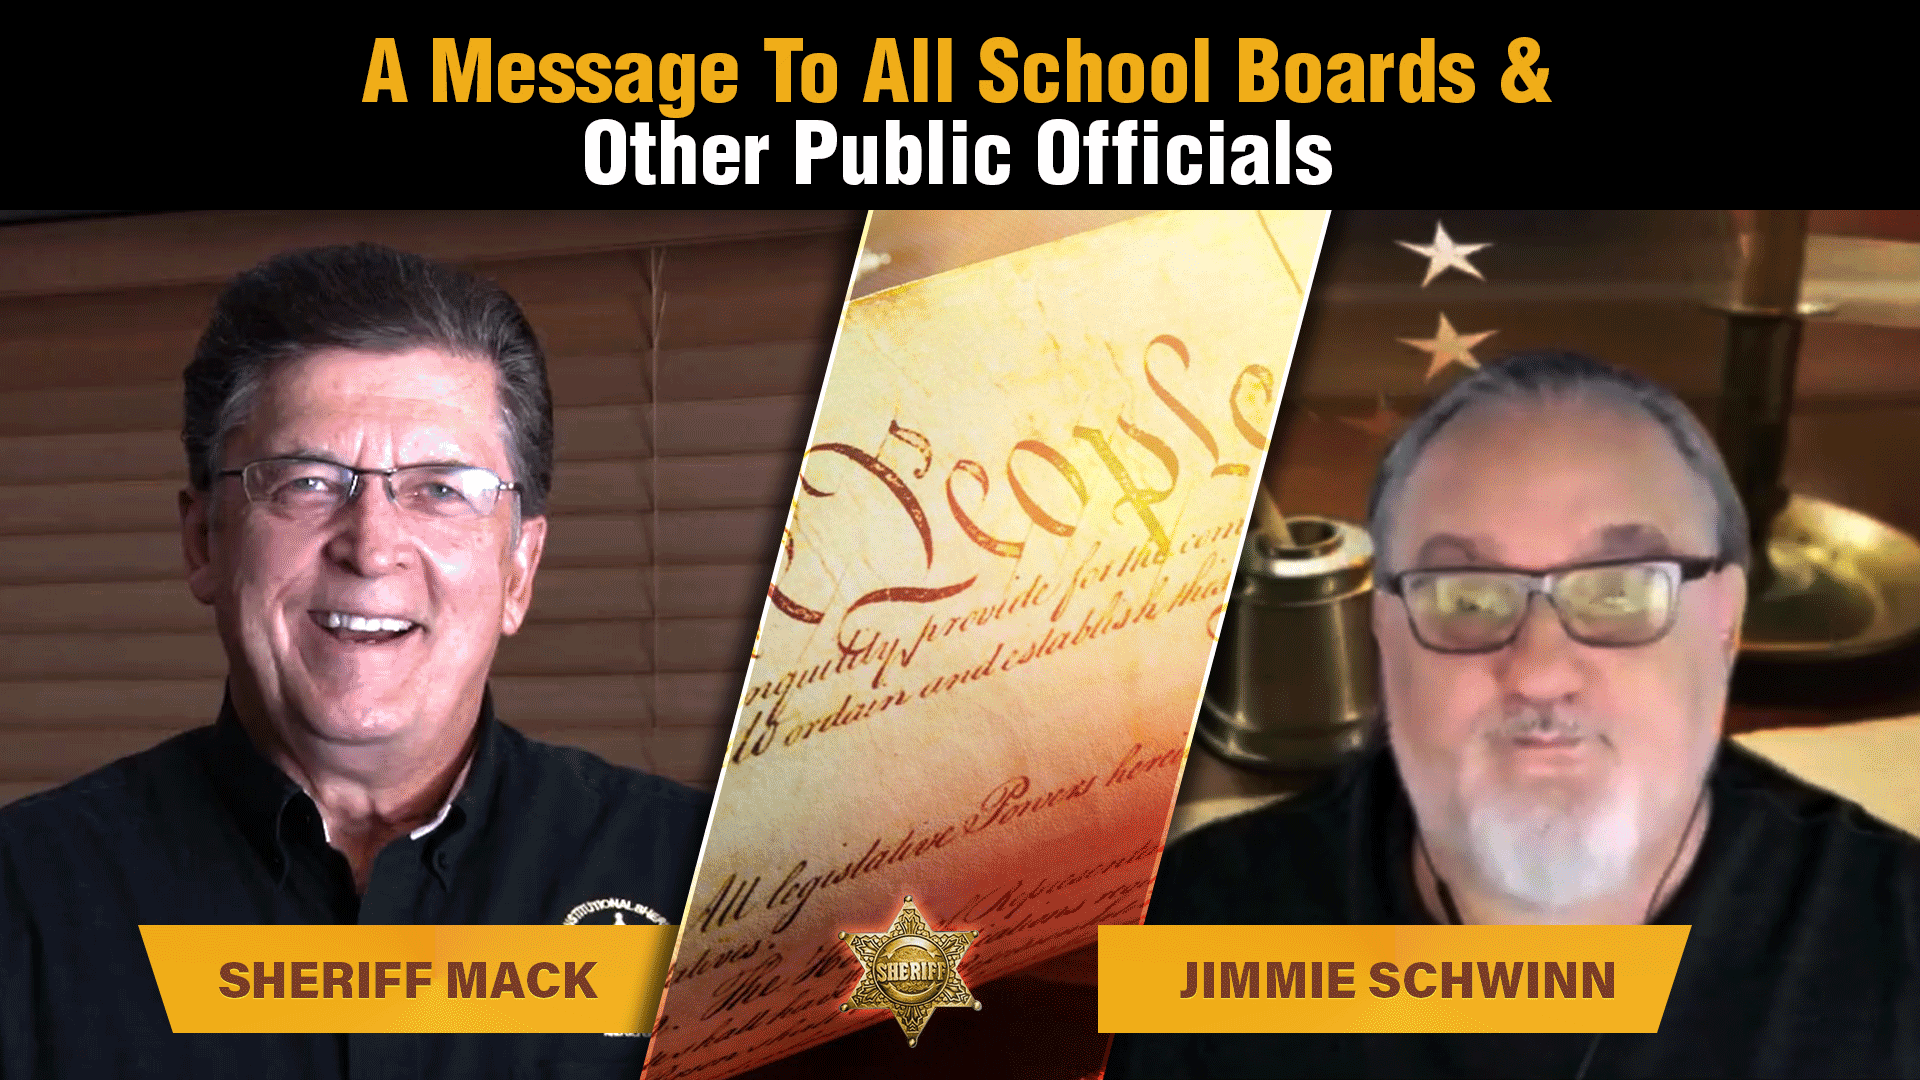 Jimmie Schwinn and Sheriff Mack share a message to the school board members and other public officials.